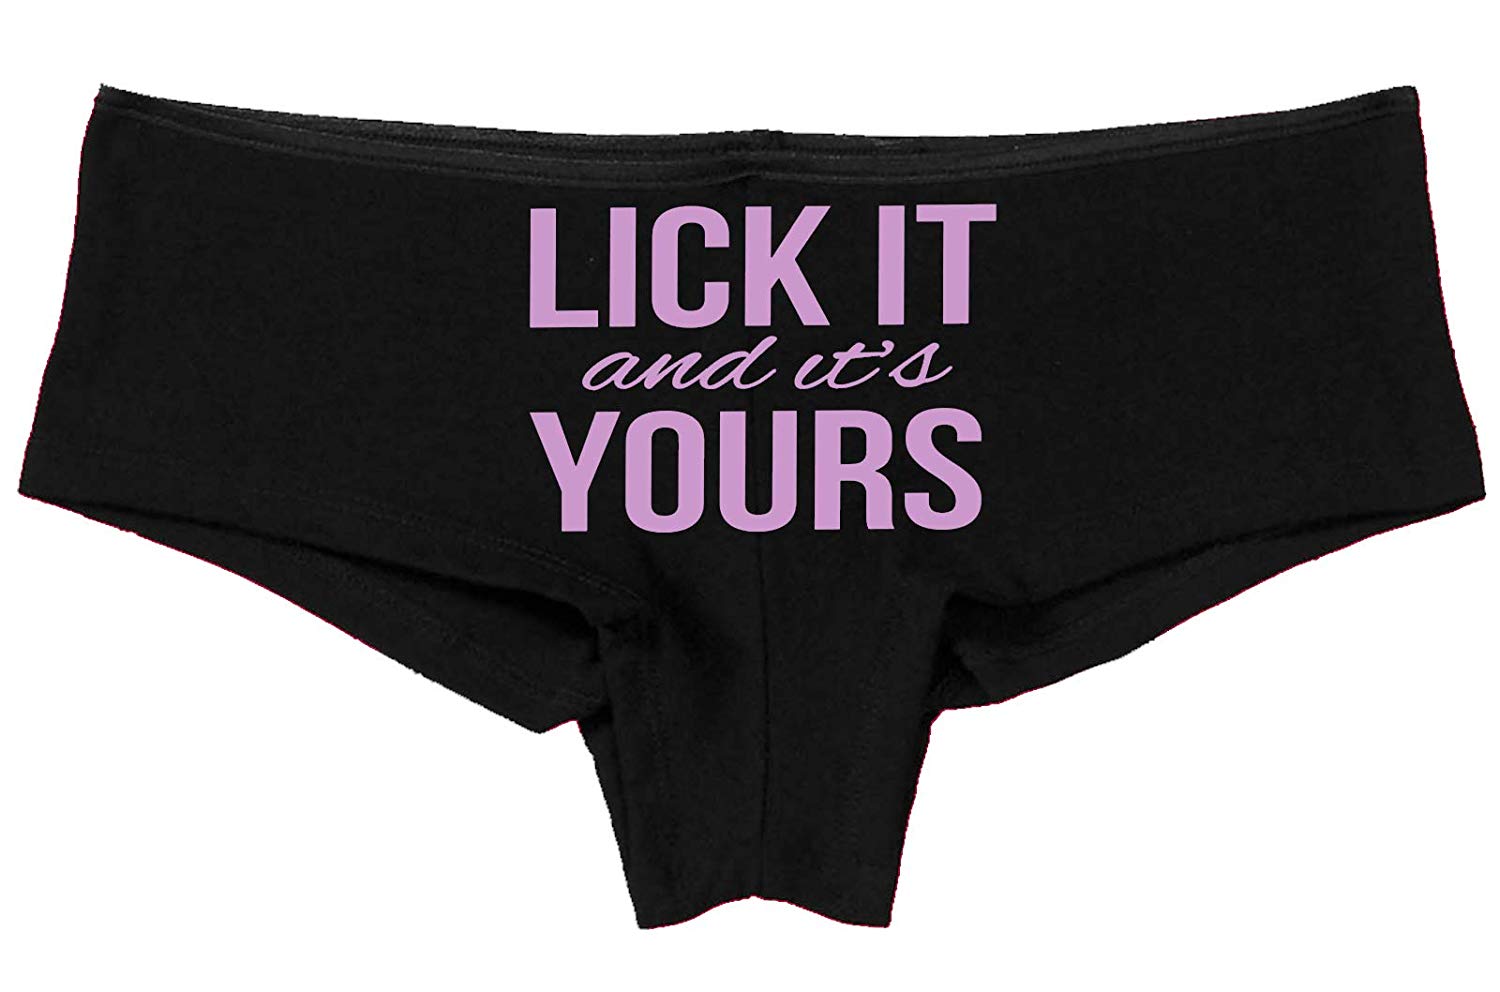 Knaughty Knickers Lick It and Its Your Funny Oral Sex Black Underwear